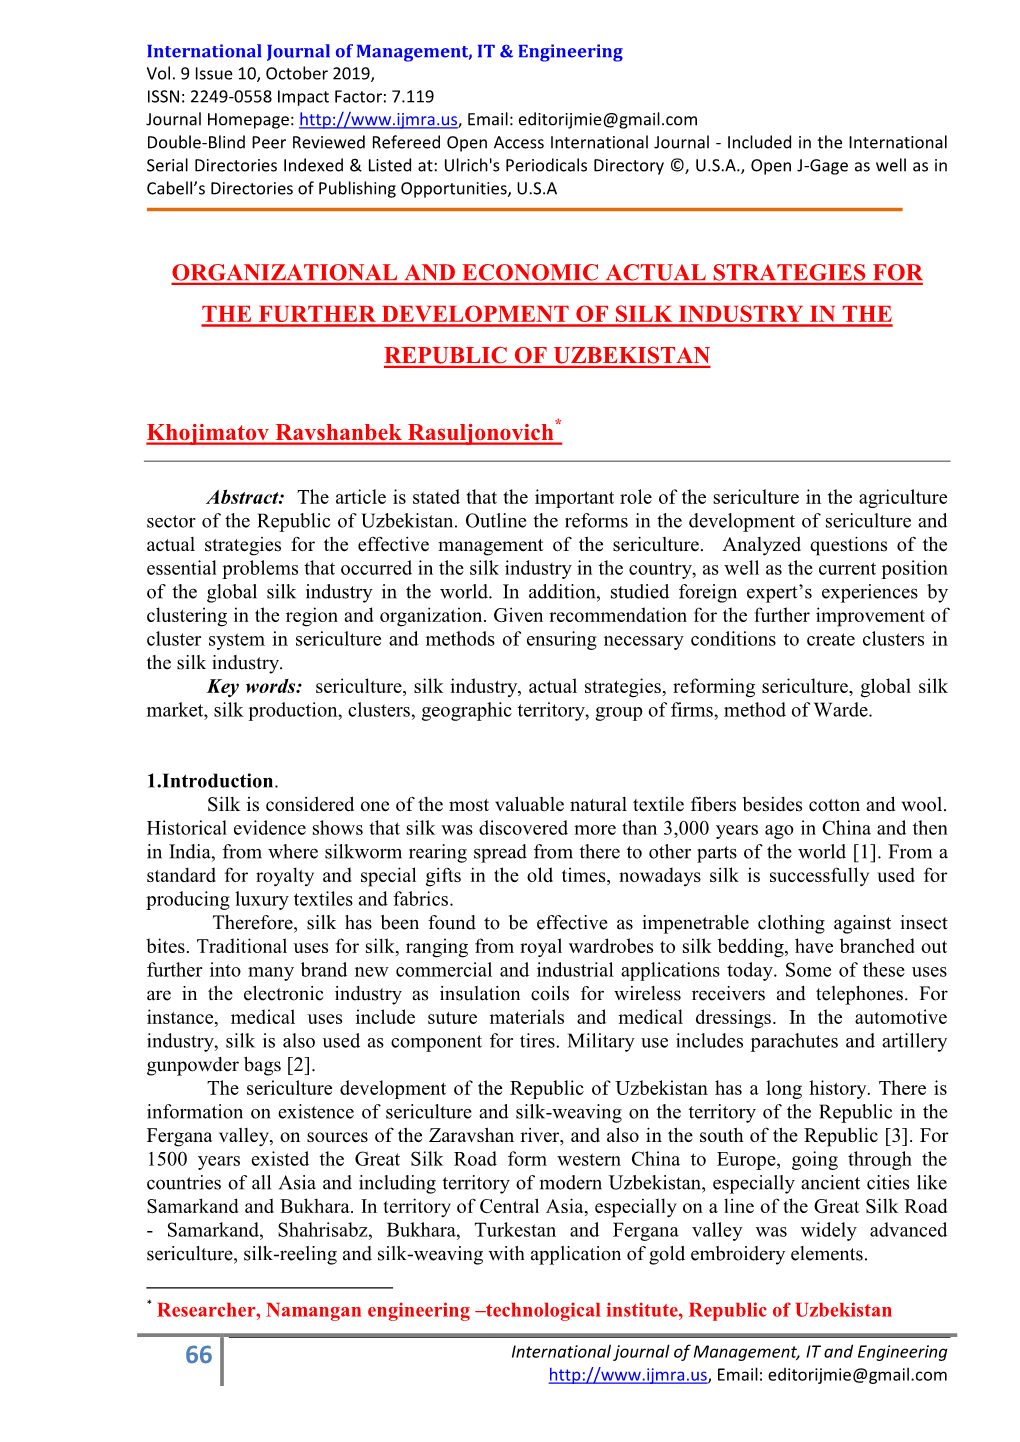 Organizational and Economic Actual Strategies for the Further Development of Silk Industry in the Republic of Uzbekistan